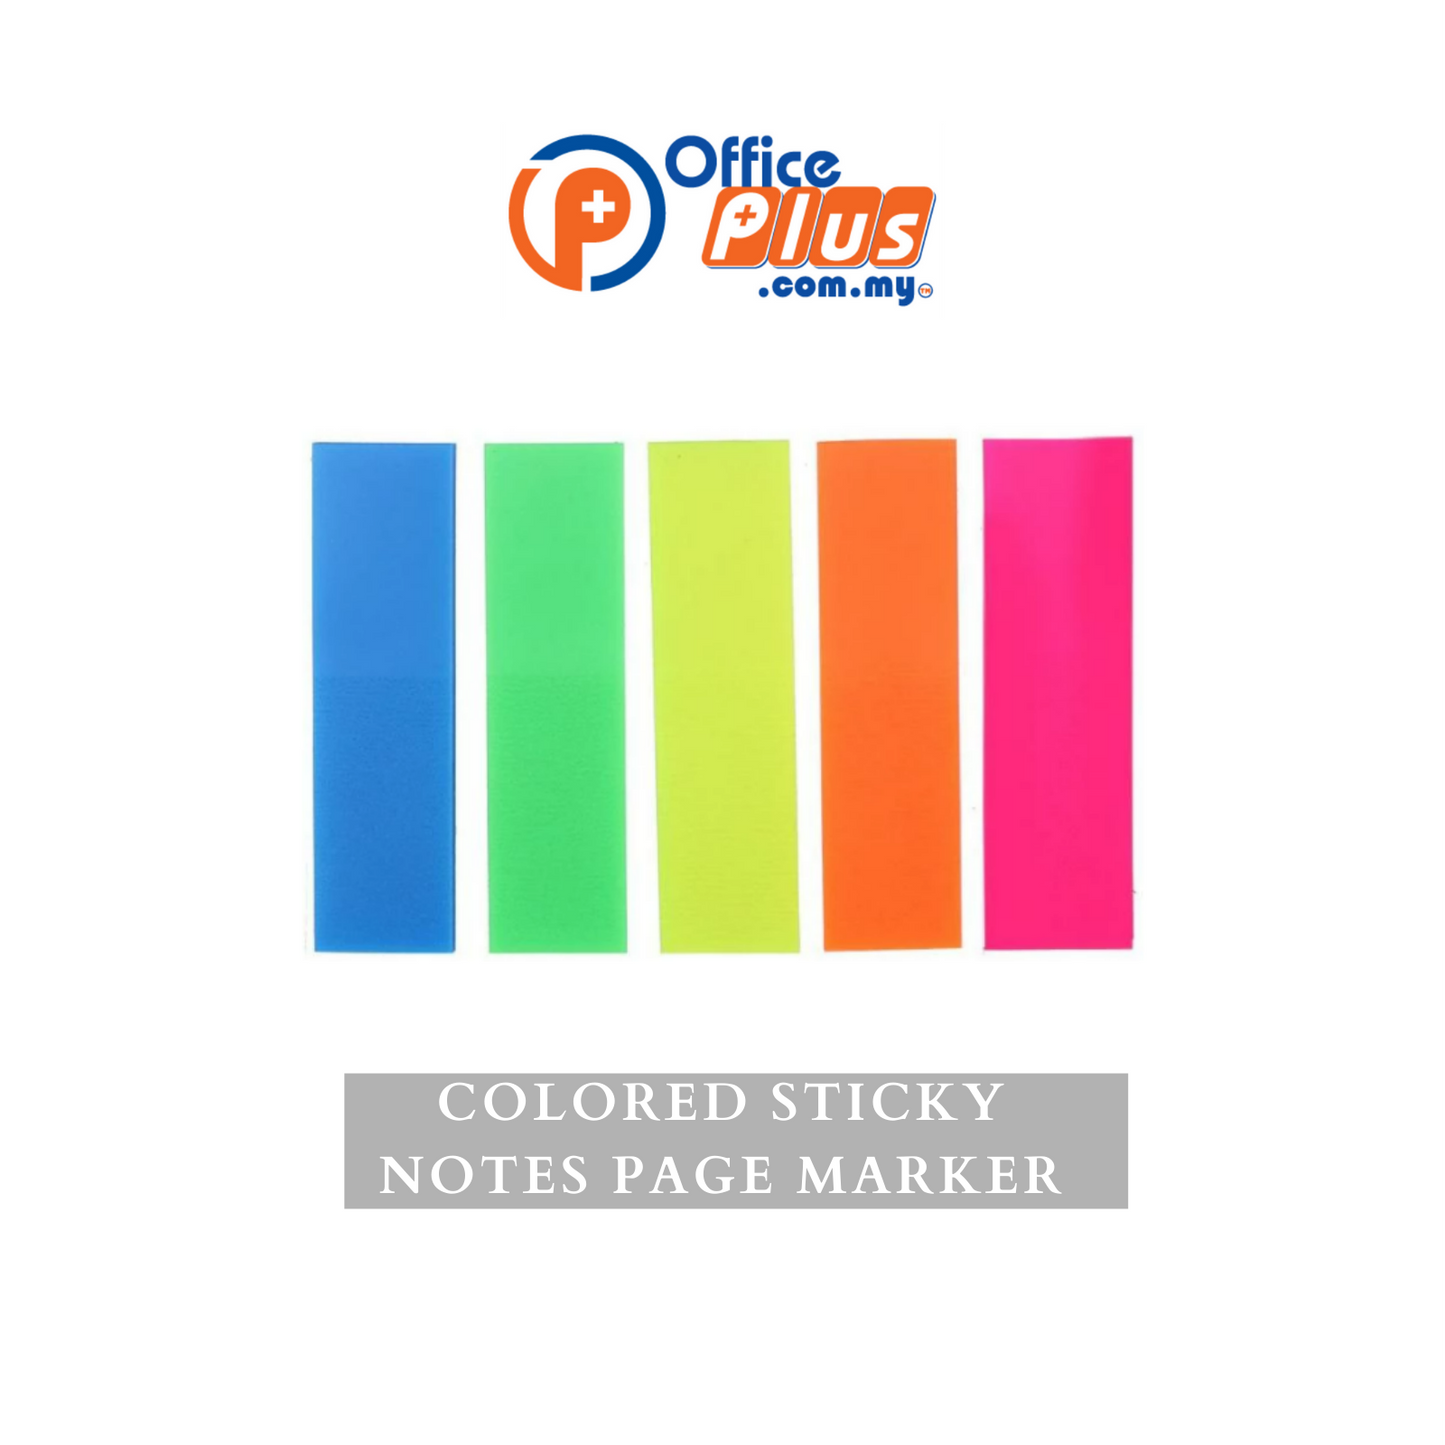 Colored Sticky Notes Page Marker - OfficePlus